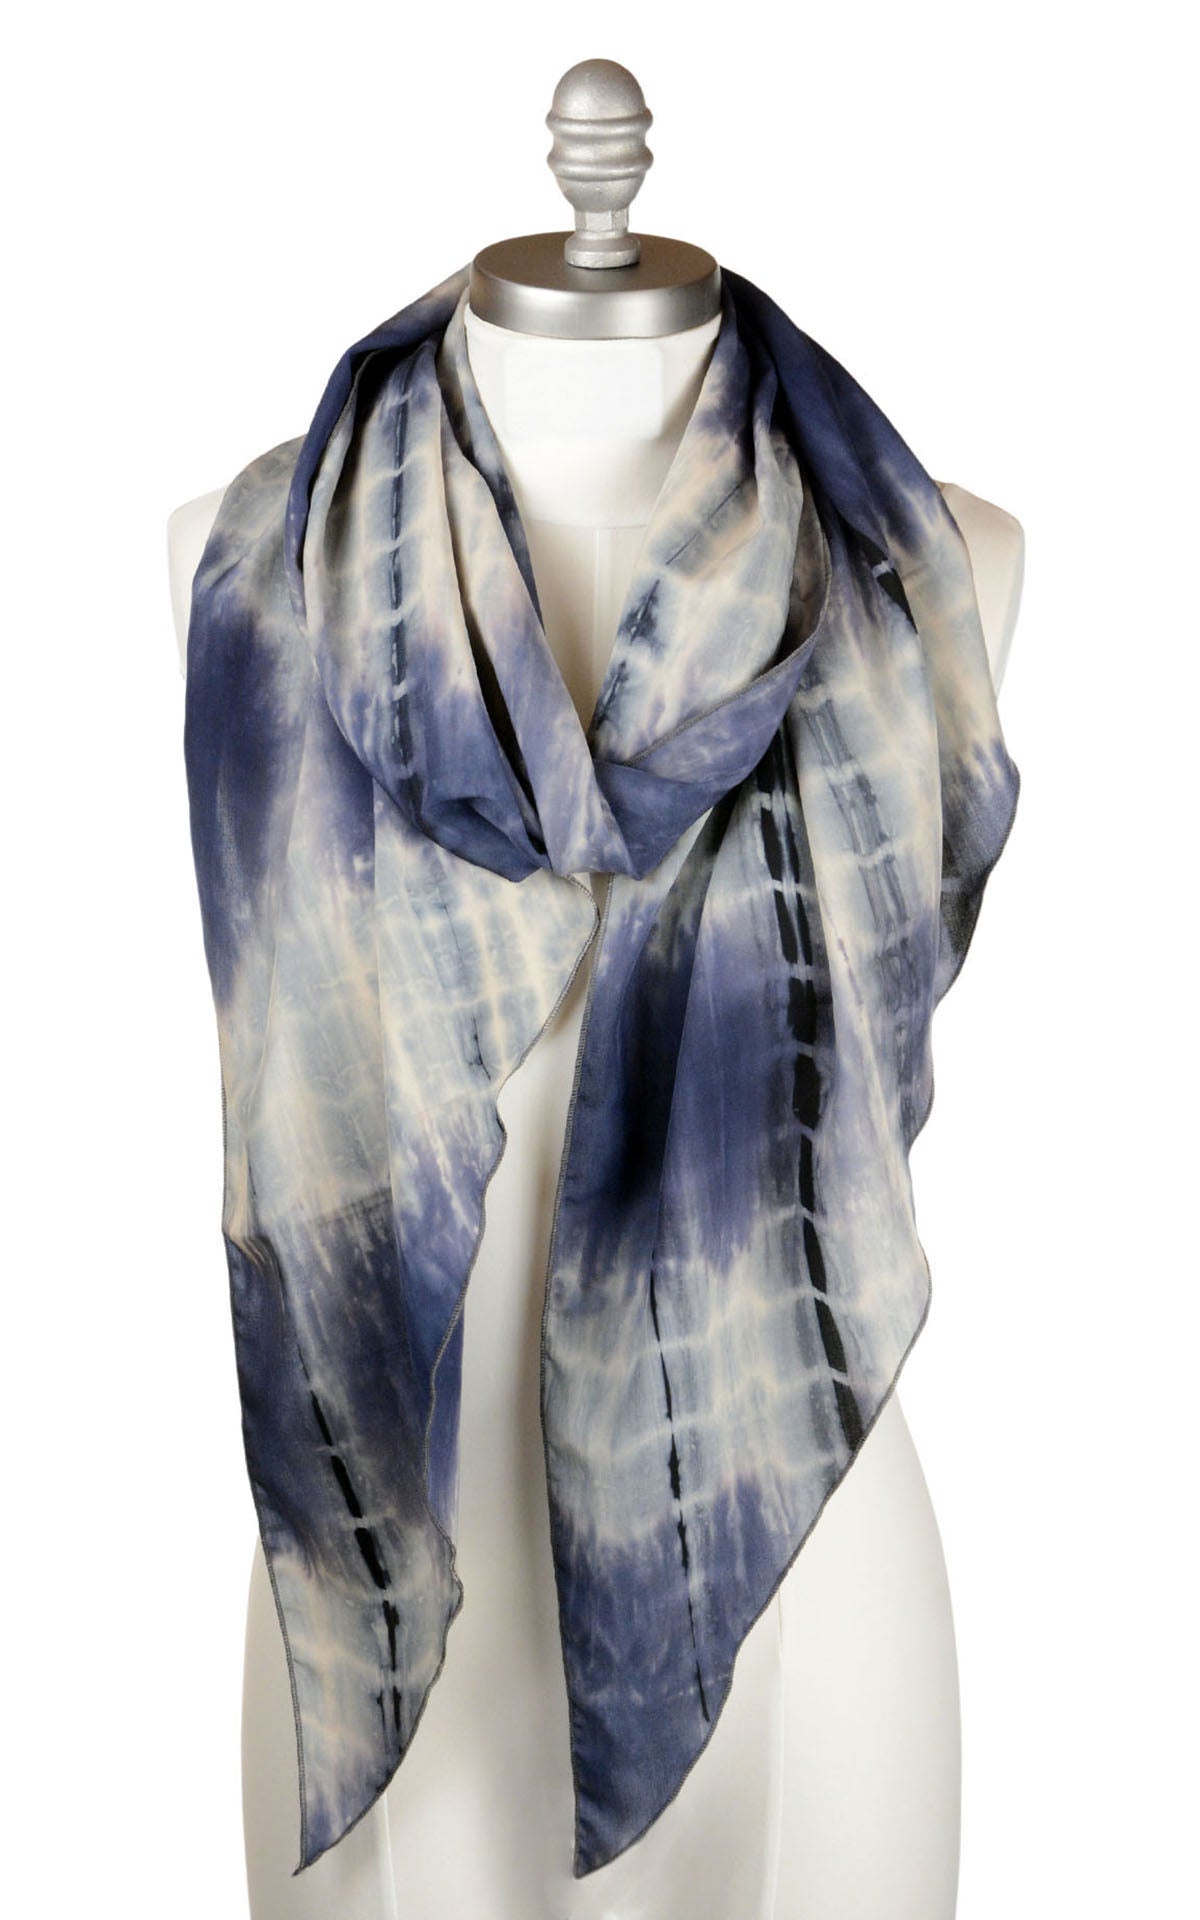 Handkerchief Scarf in Blue Tea, part of the Tea Time 2 Collection. LYC by Pandemonium is handmade in Seattle, WA, USA.